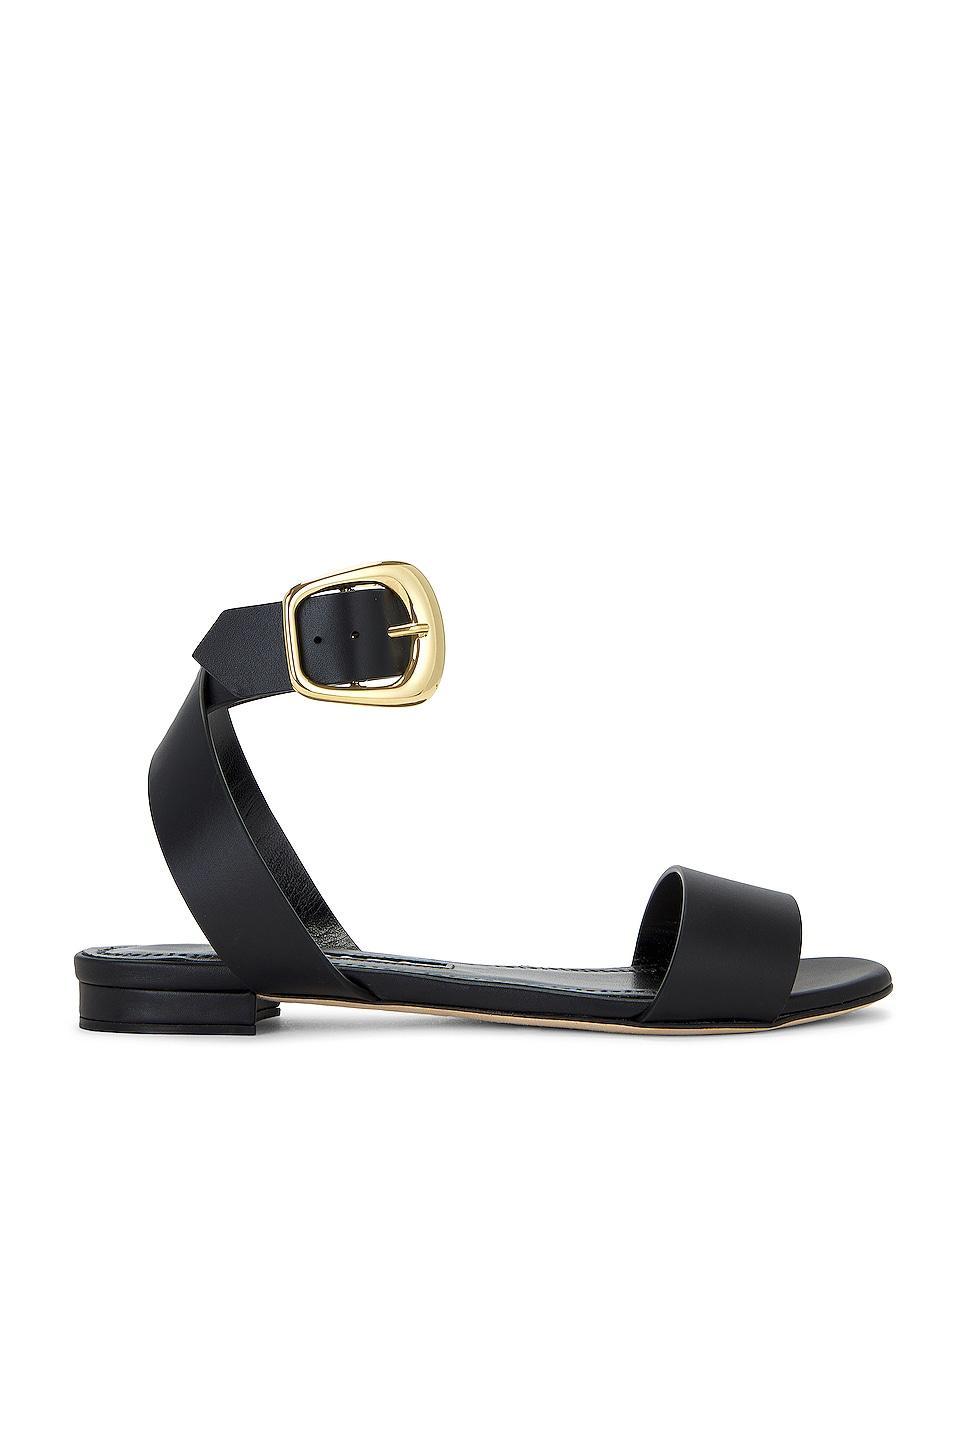 Brutas Leather Ankle-Strap Sandals Product Image